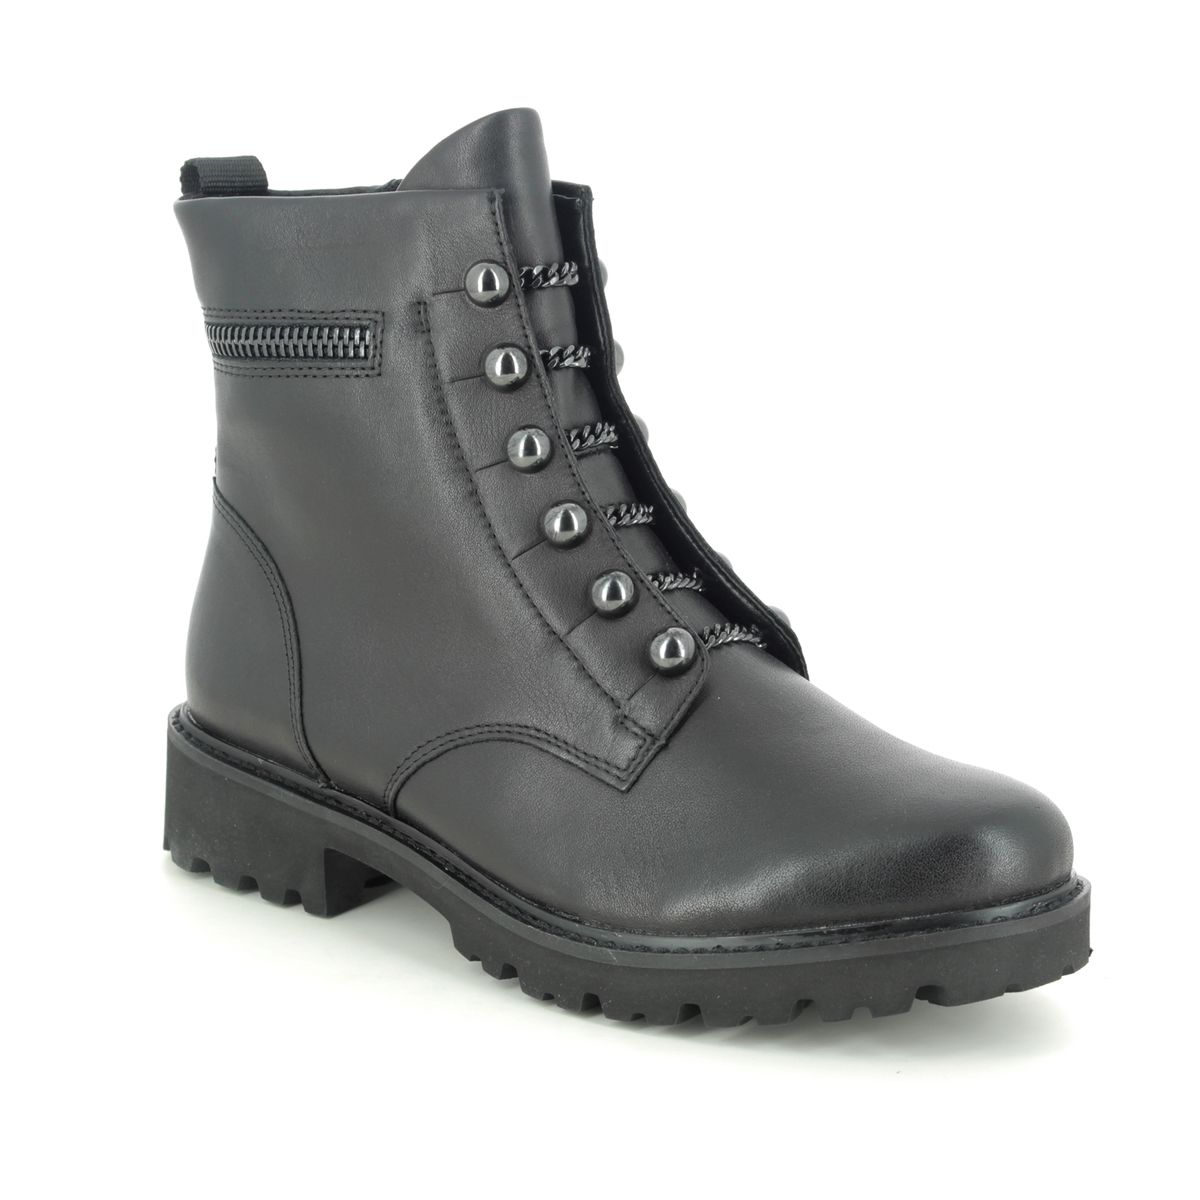 Remonte Docland Black Leather Womens Biker Boots D8670-01 In Size 41 In Plain Black Leather